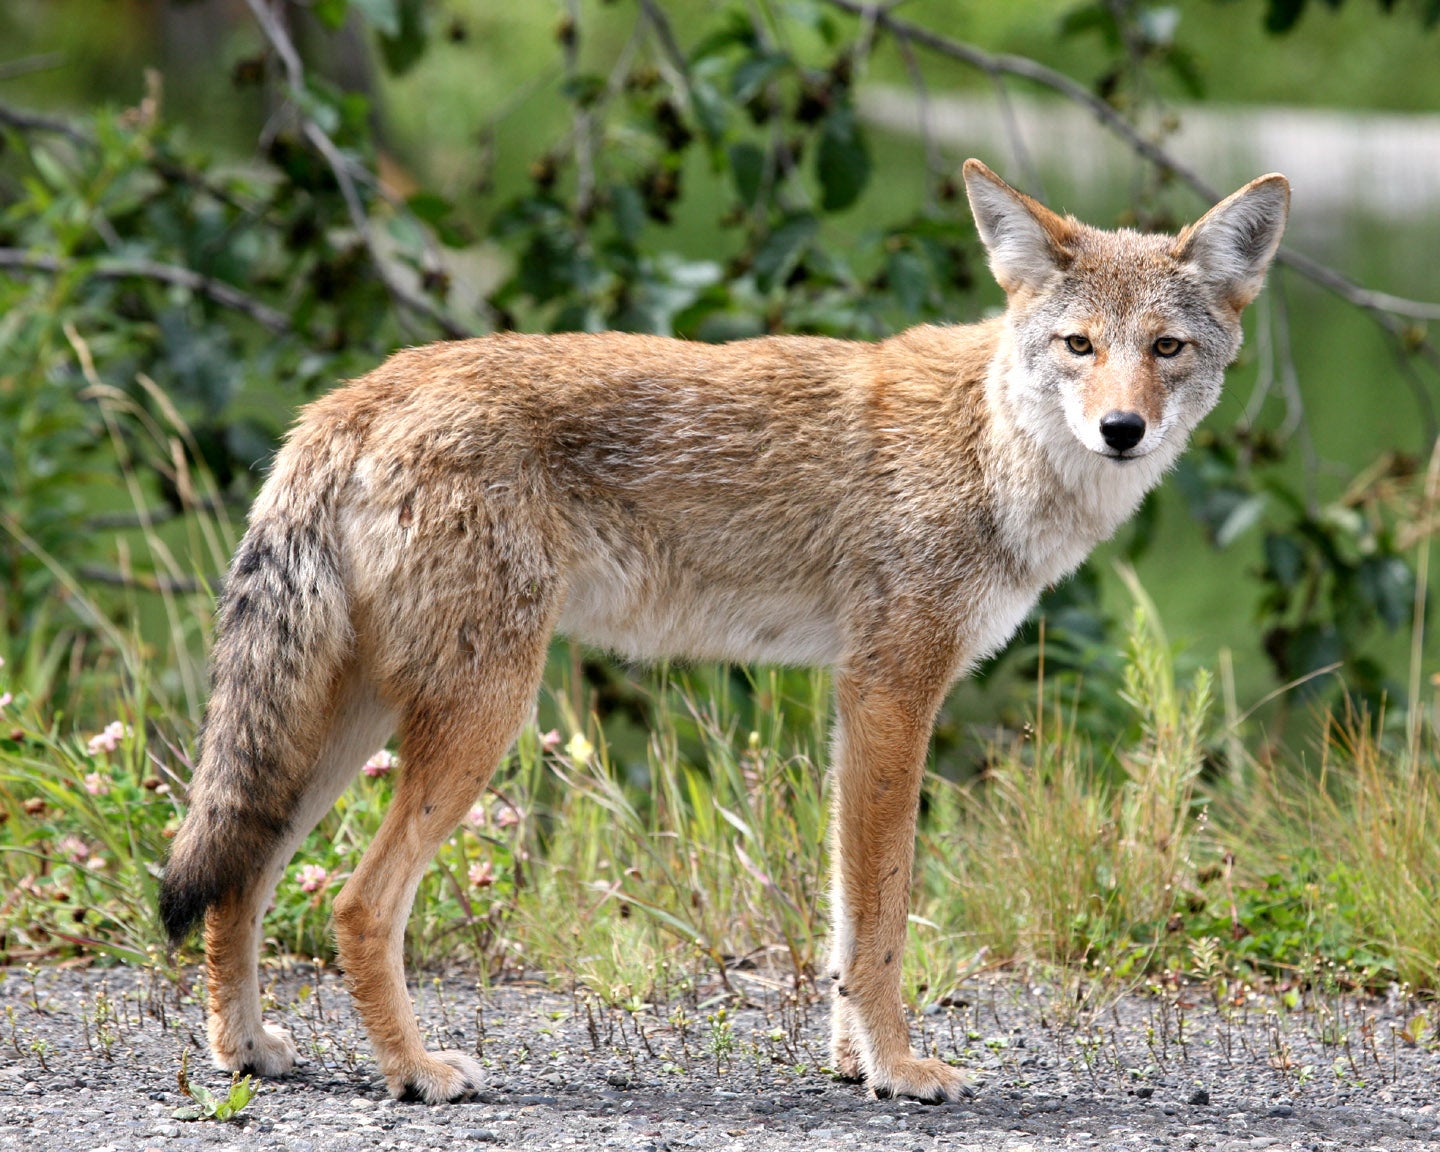 A coyote in San Francisco that caused eight months of terror has been captured and euthanised, officials confirmed